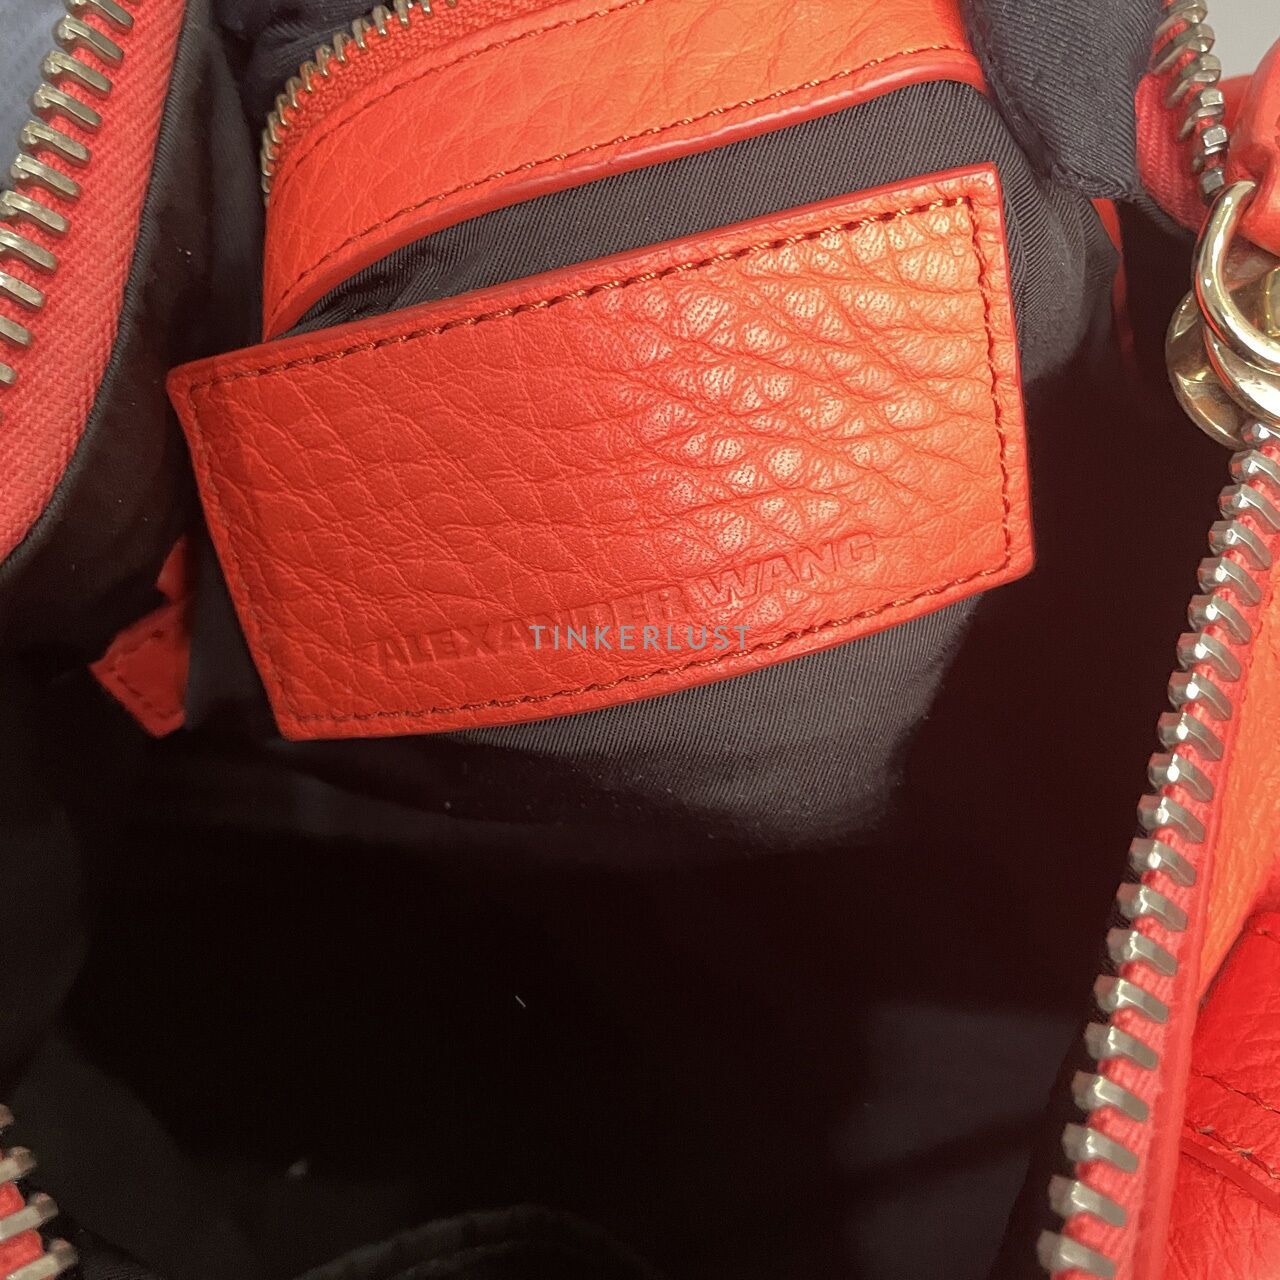 Alexander Wang Rocco Red Pebbled Leather GHW Handbag